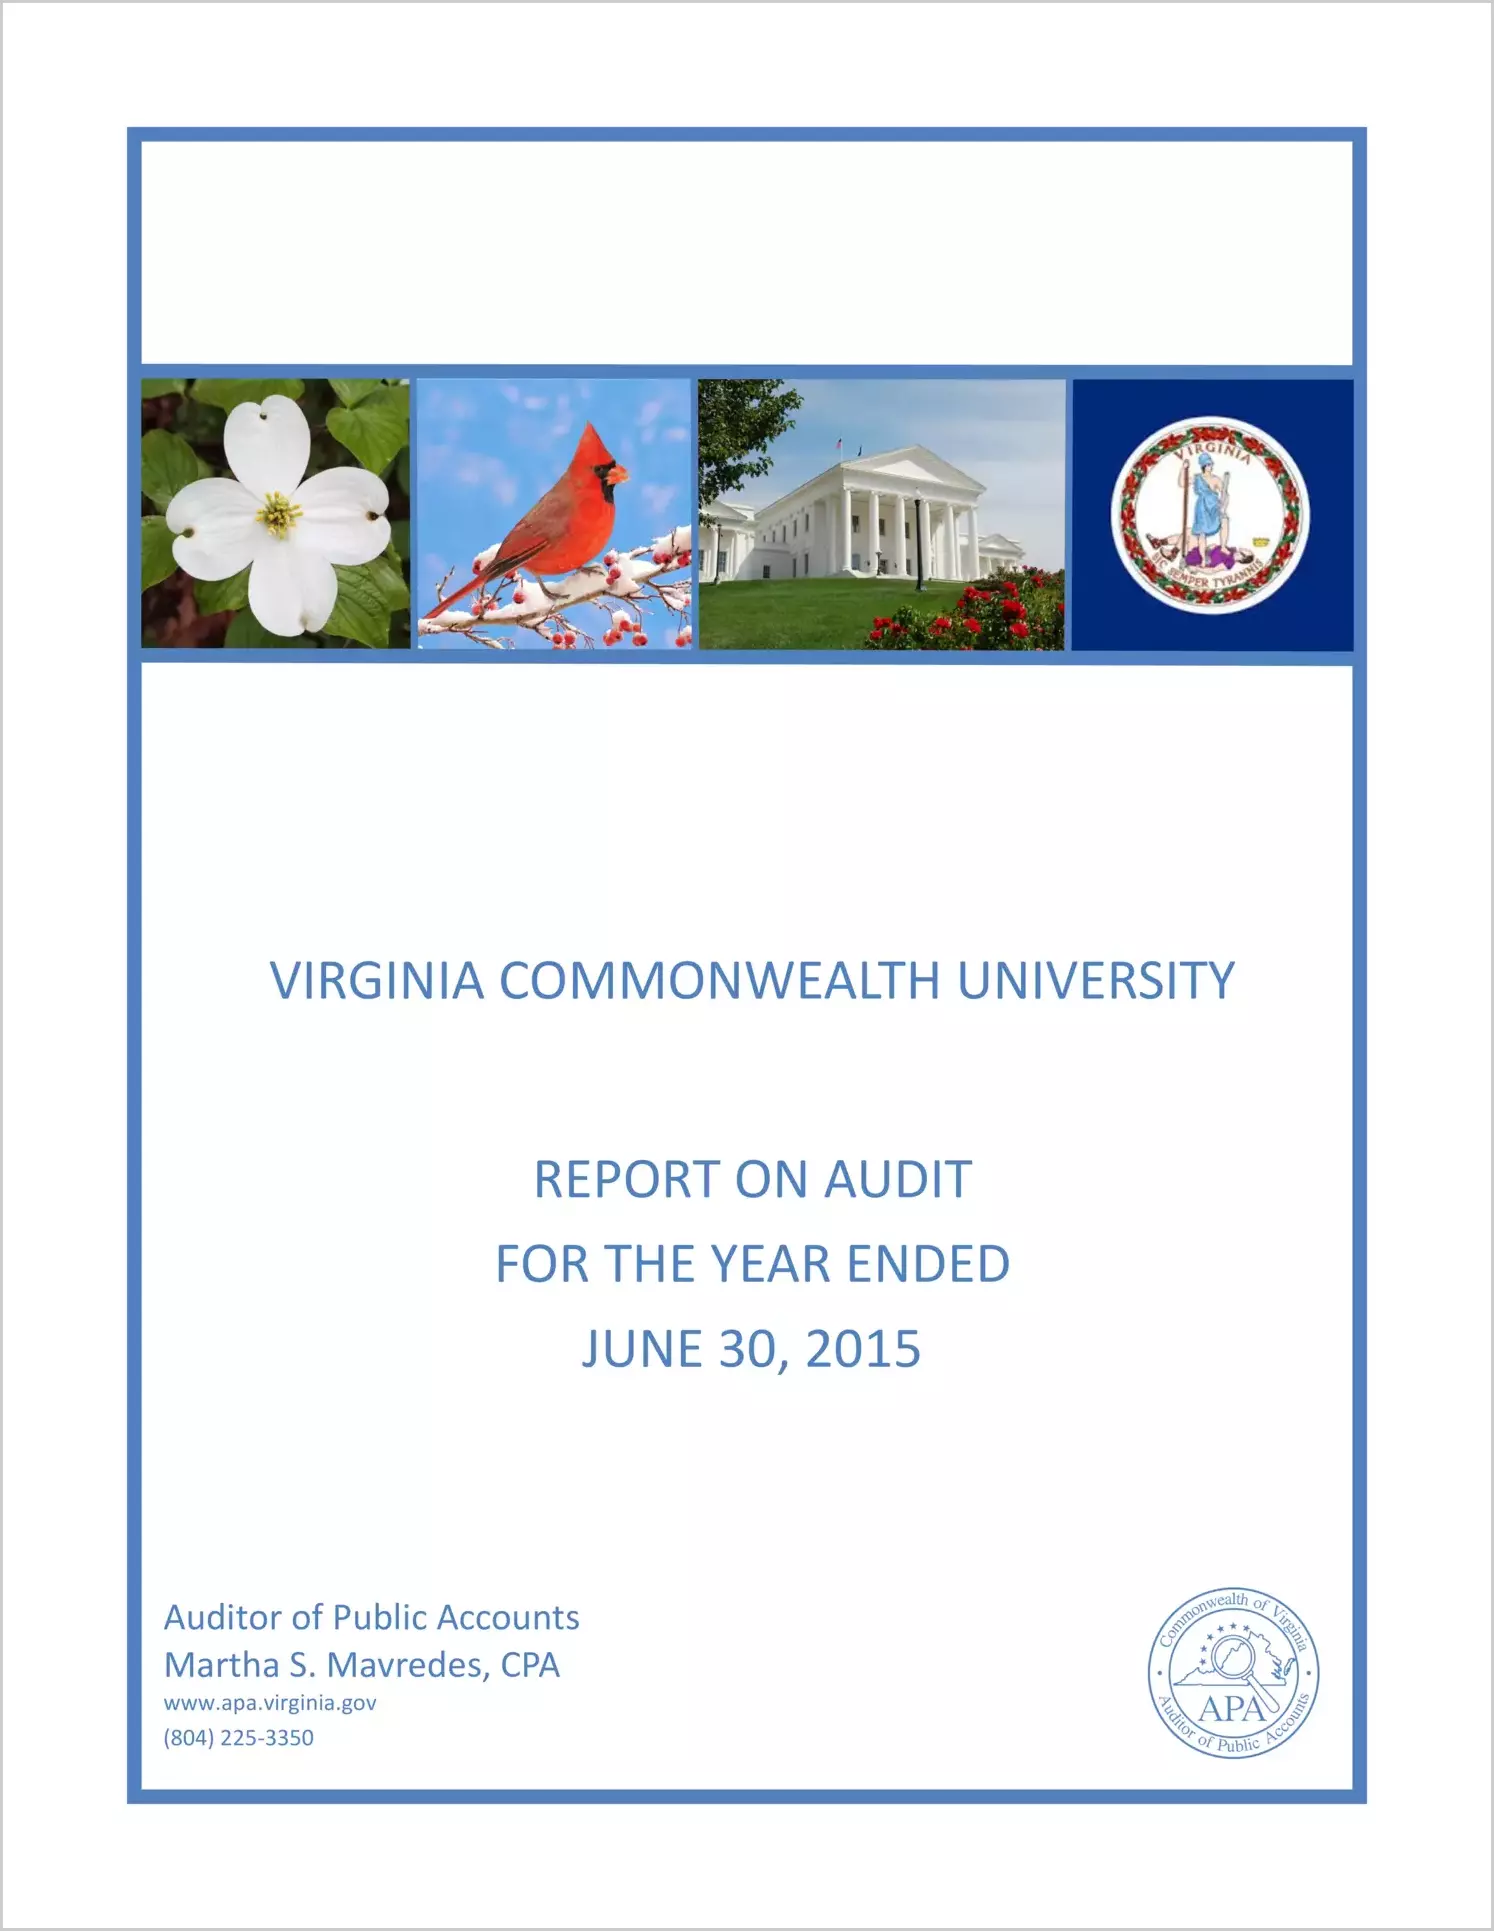 Virginia Commonwealth University for the year ended June 30, 2015